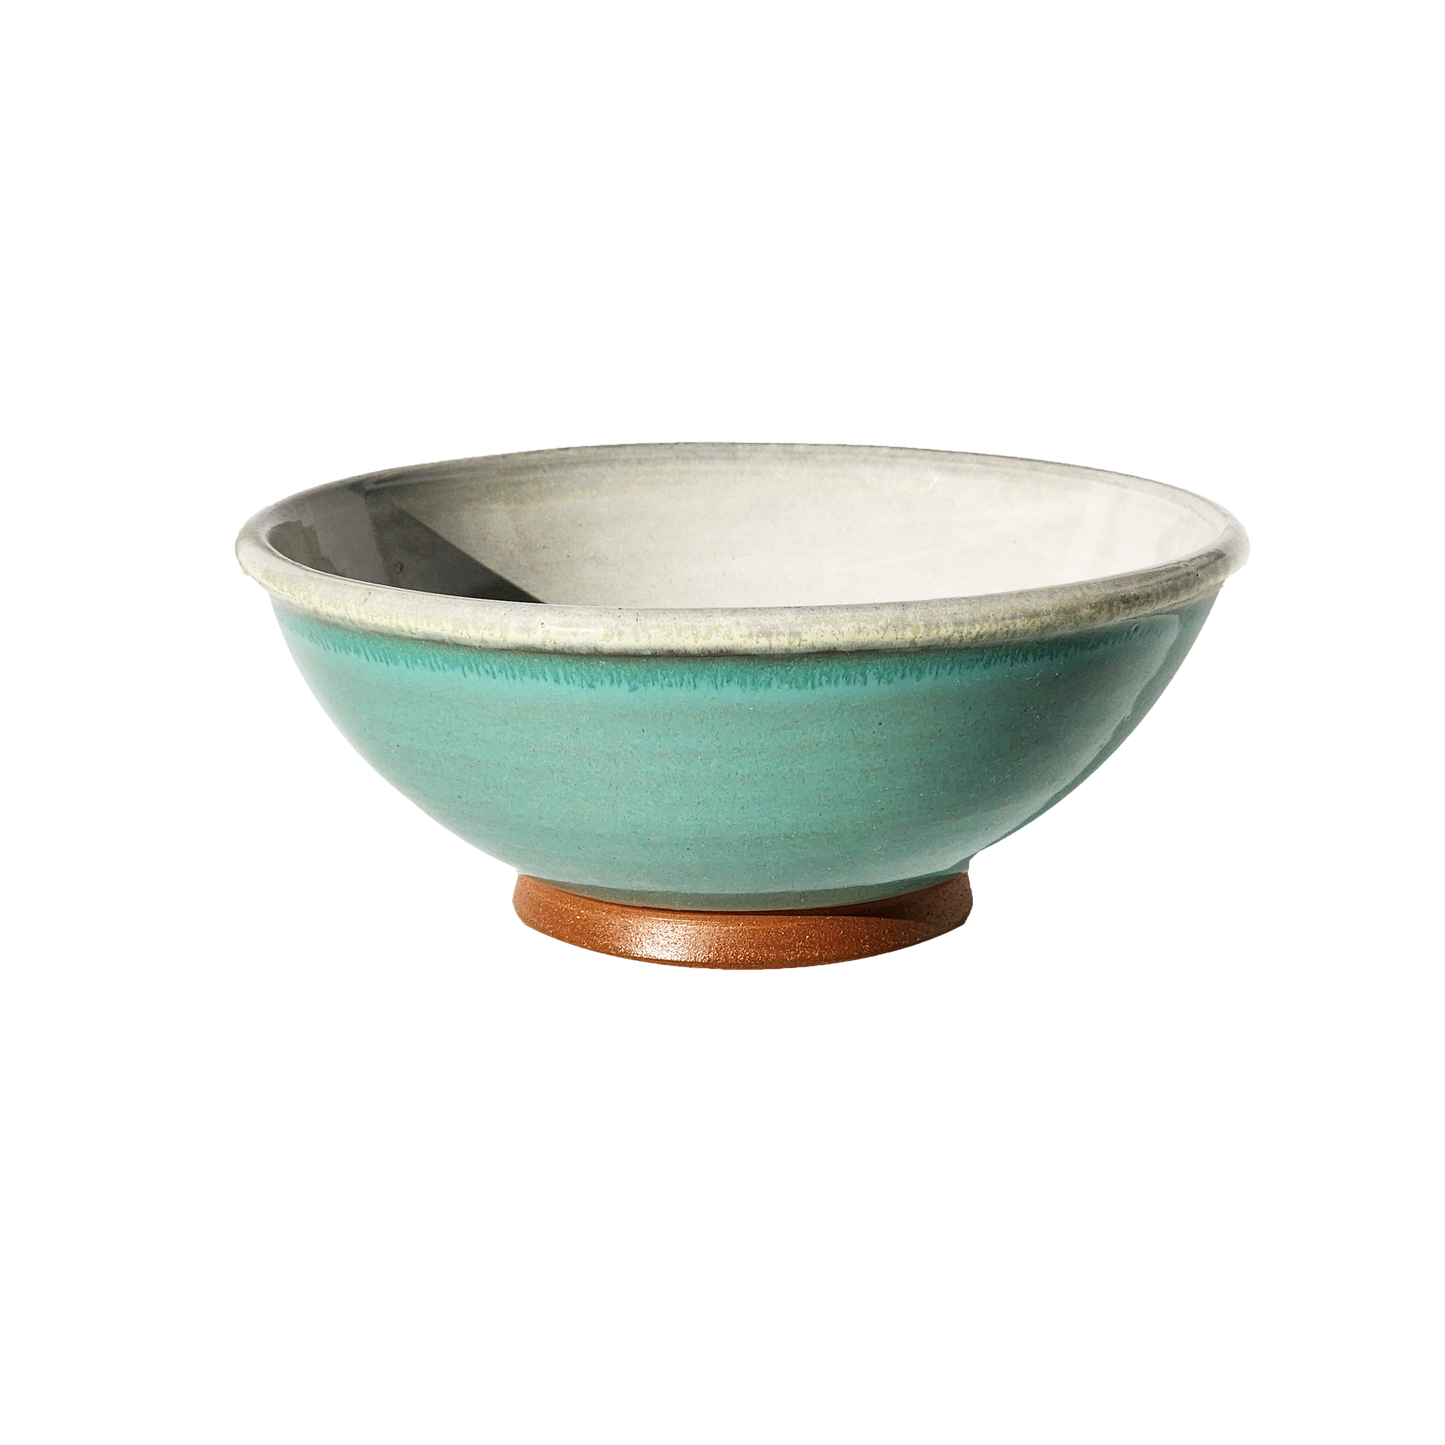 Image: A medium mixing bowl in tranquil sky blue, providing a functional capacity of 4 cups. Bring a sense of calmness and serenity to your culinary preparations.